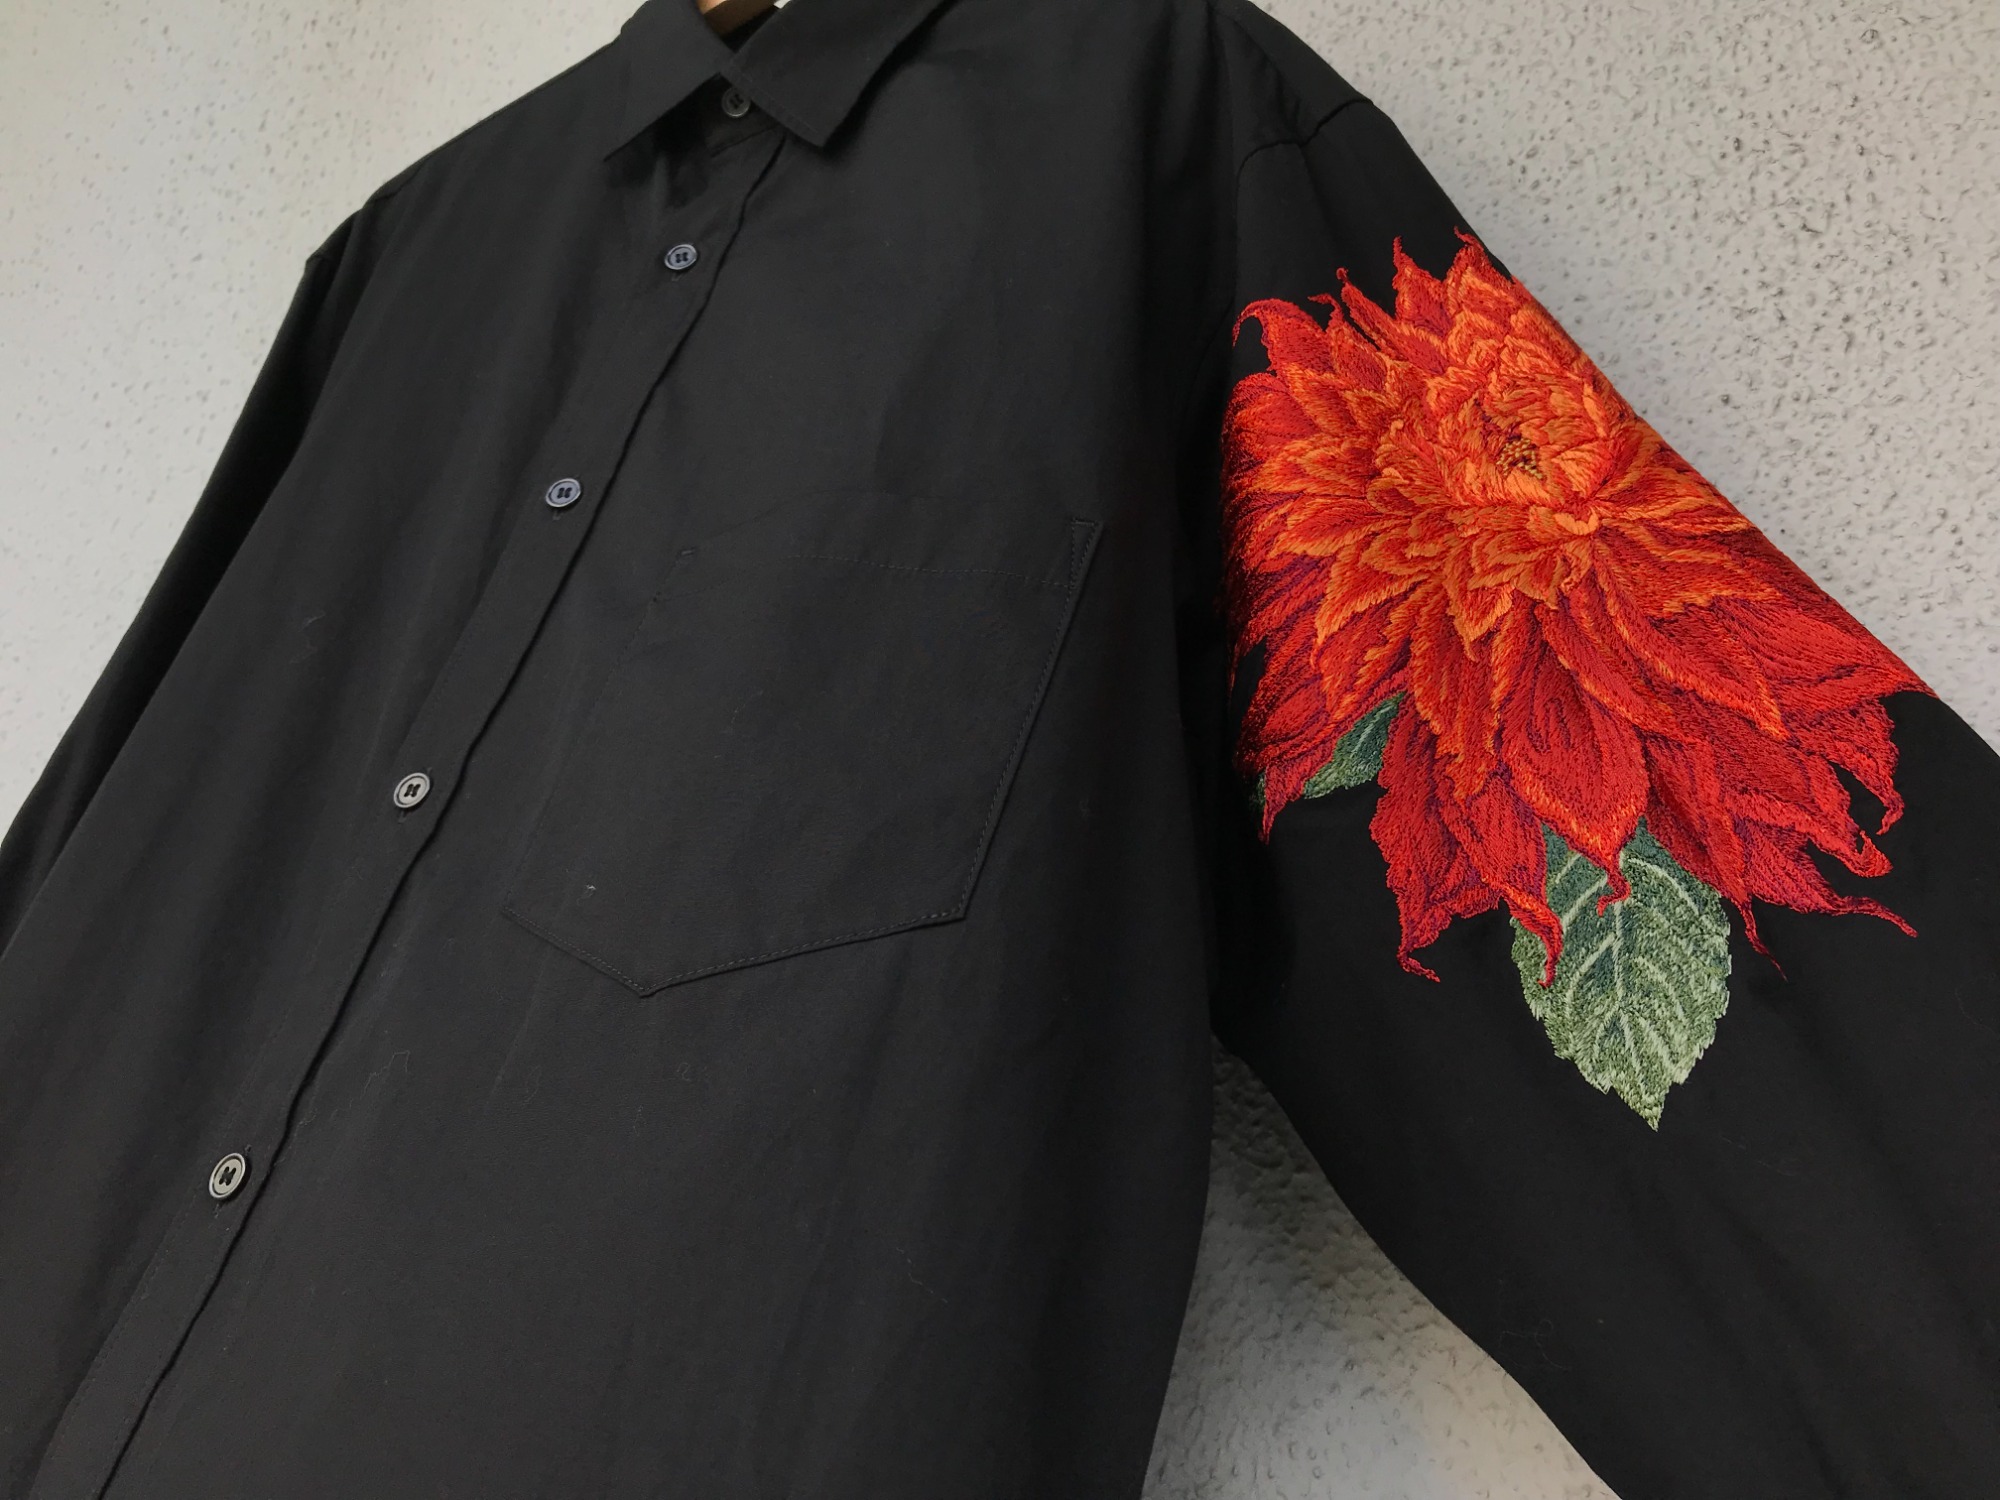 yohj yamamoto pour homme 22SS ダリア刺繍 シャツ-